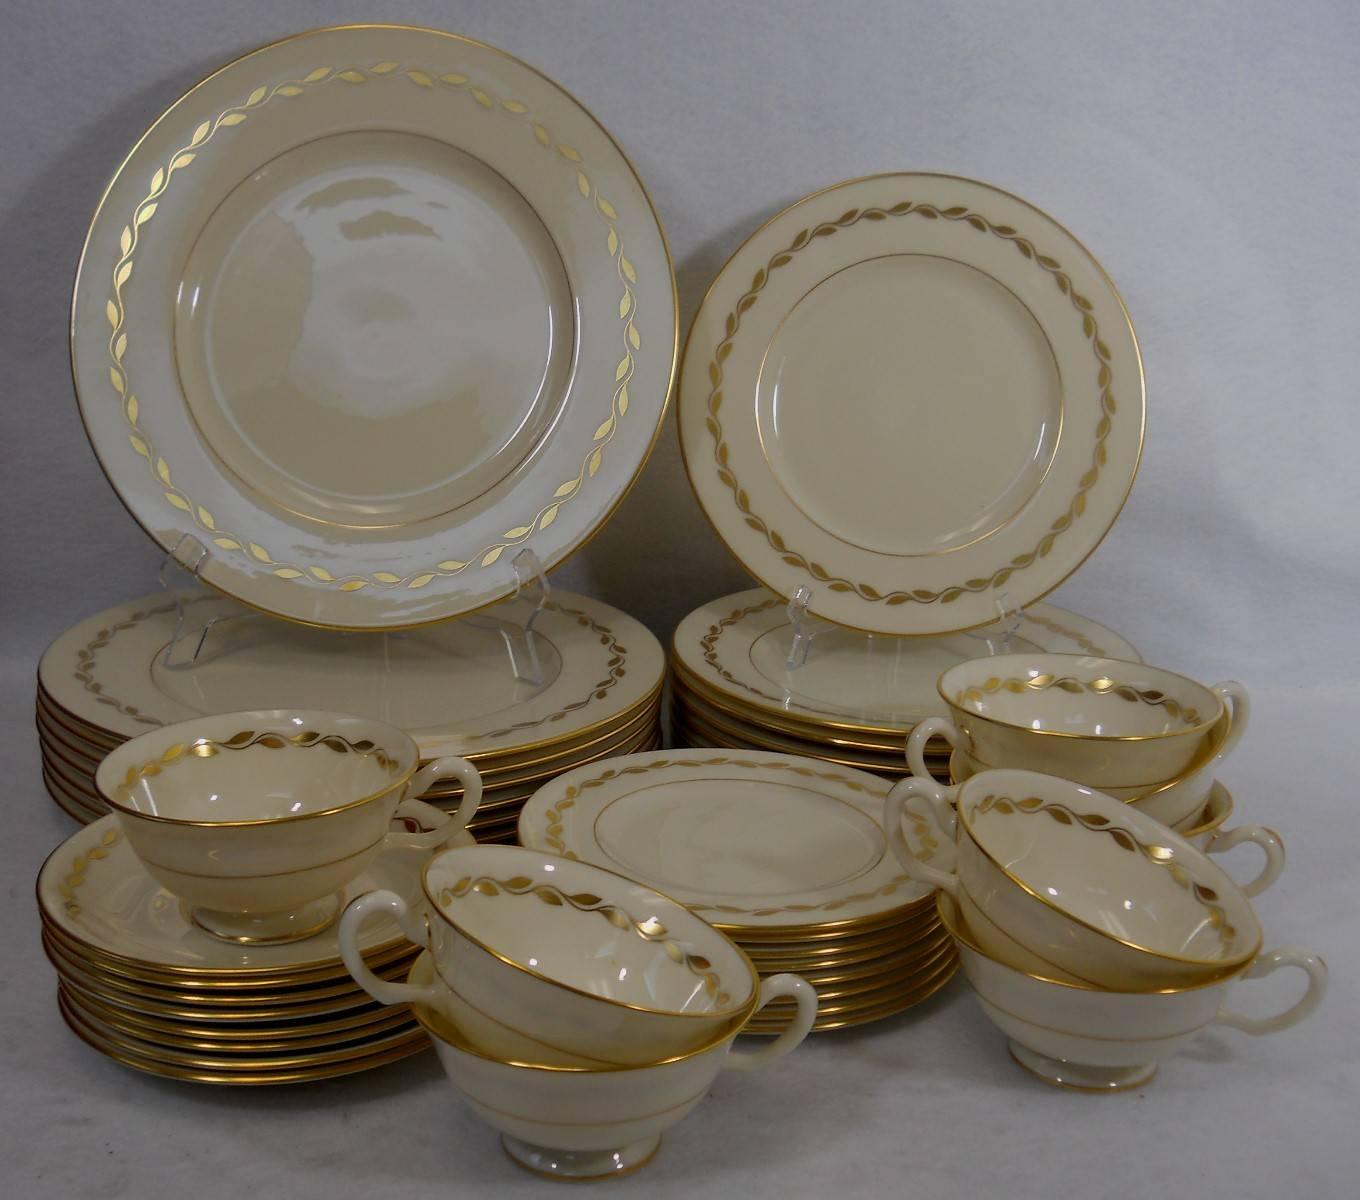 LENOX china GOLDEN WREATH O303 pattern 40-pc SET SERVICE for Eight